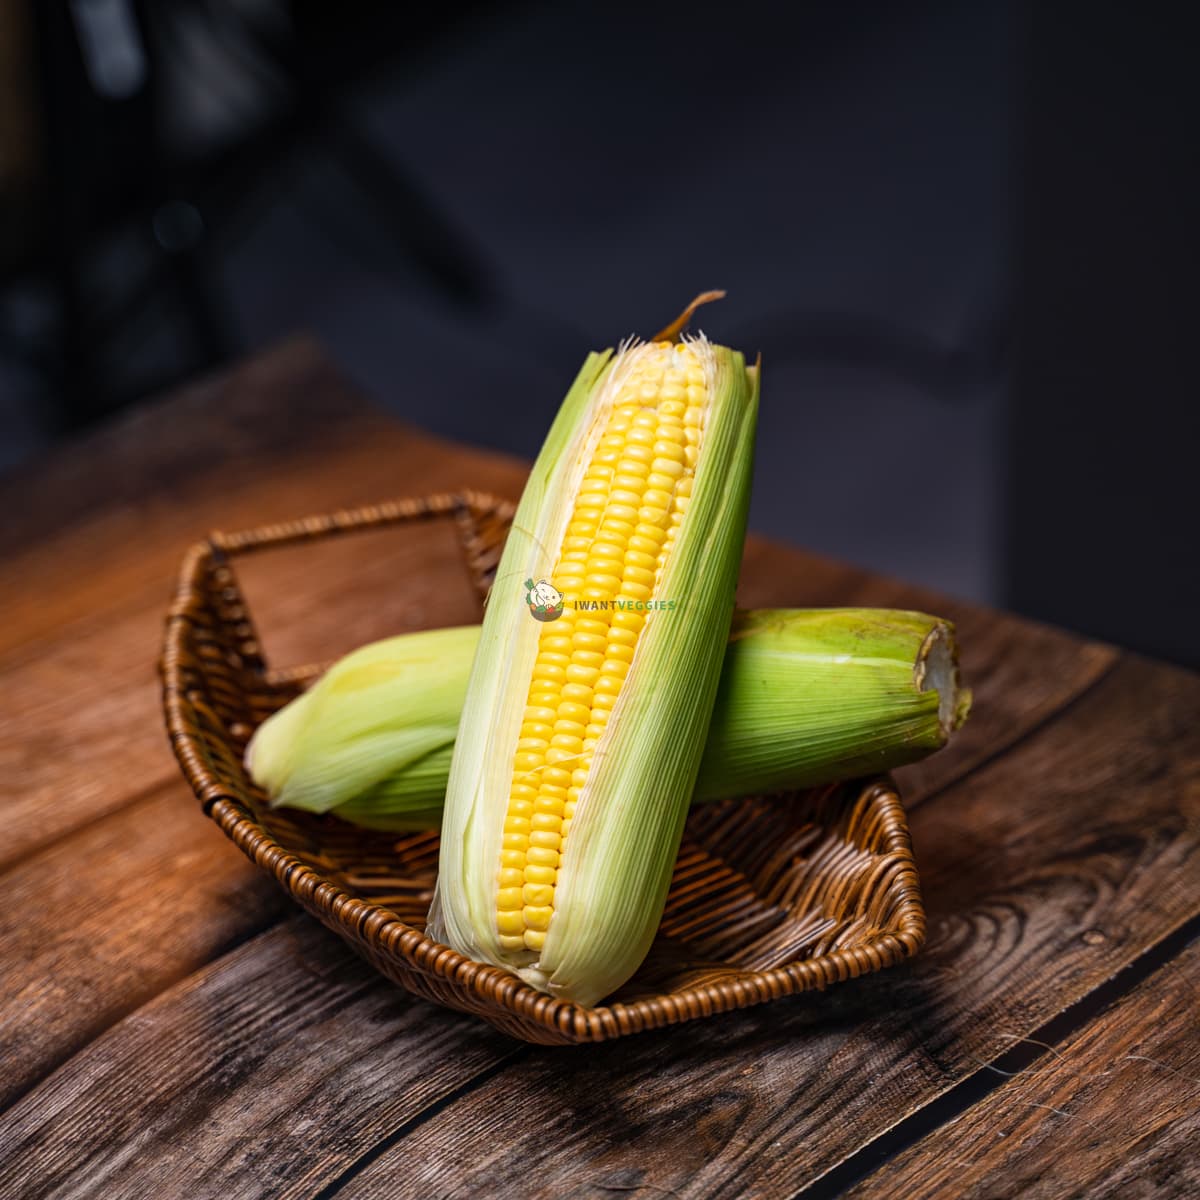 Two yellow sweet corn on a wooden basket - fresh, vibrant, and ready to be enjoyed. A perfect summer treat!